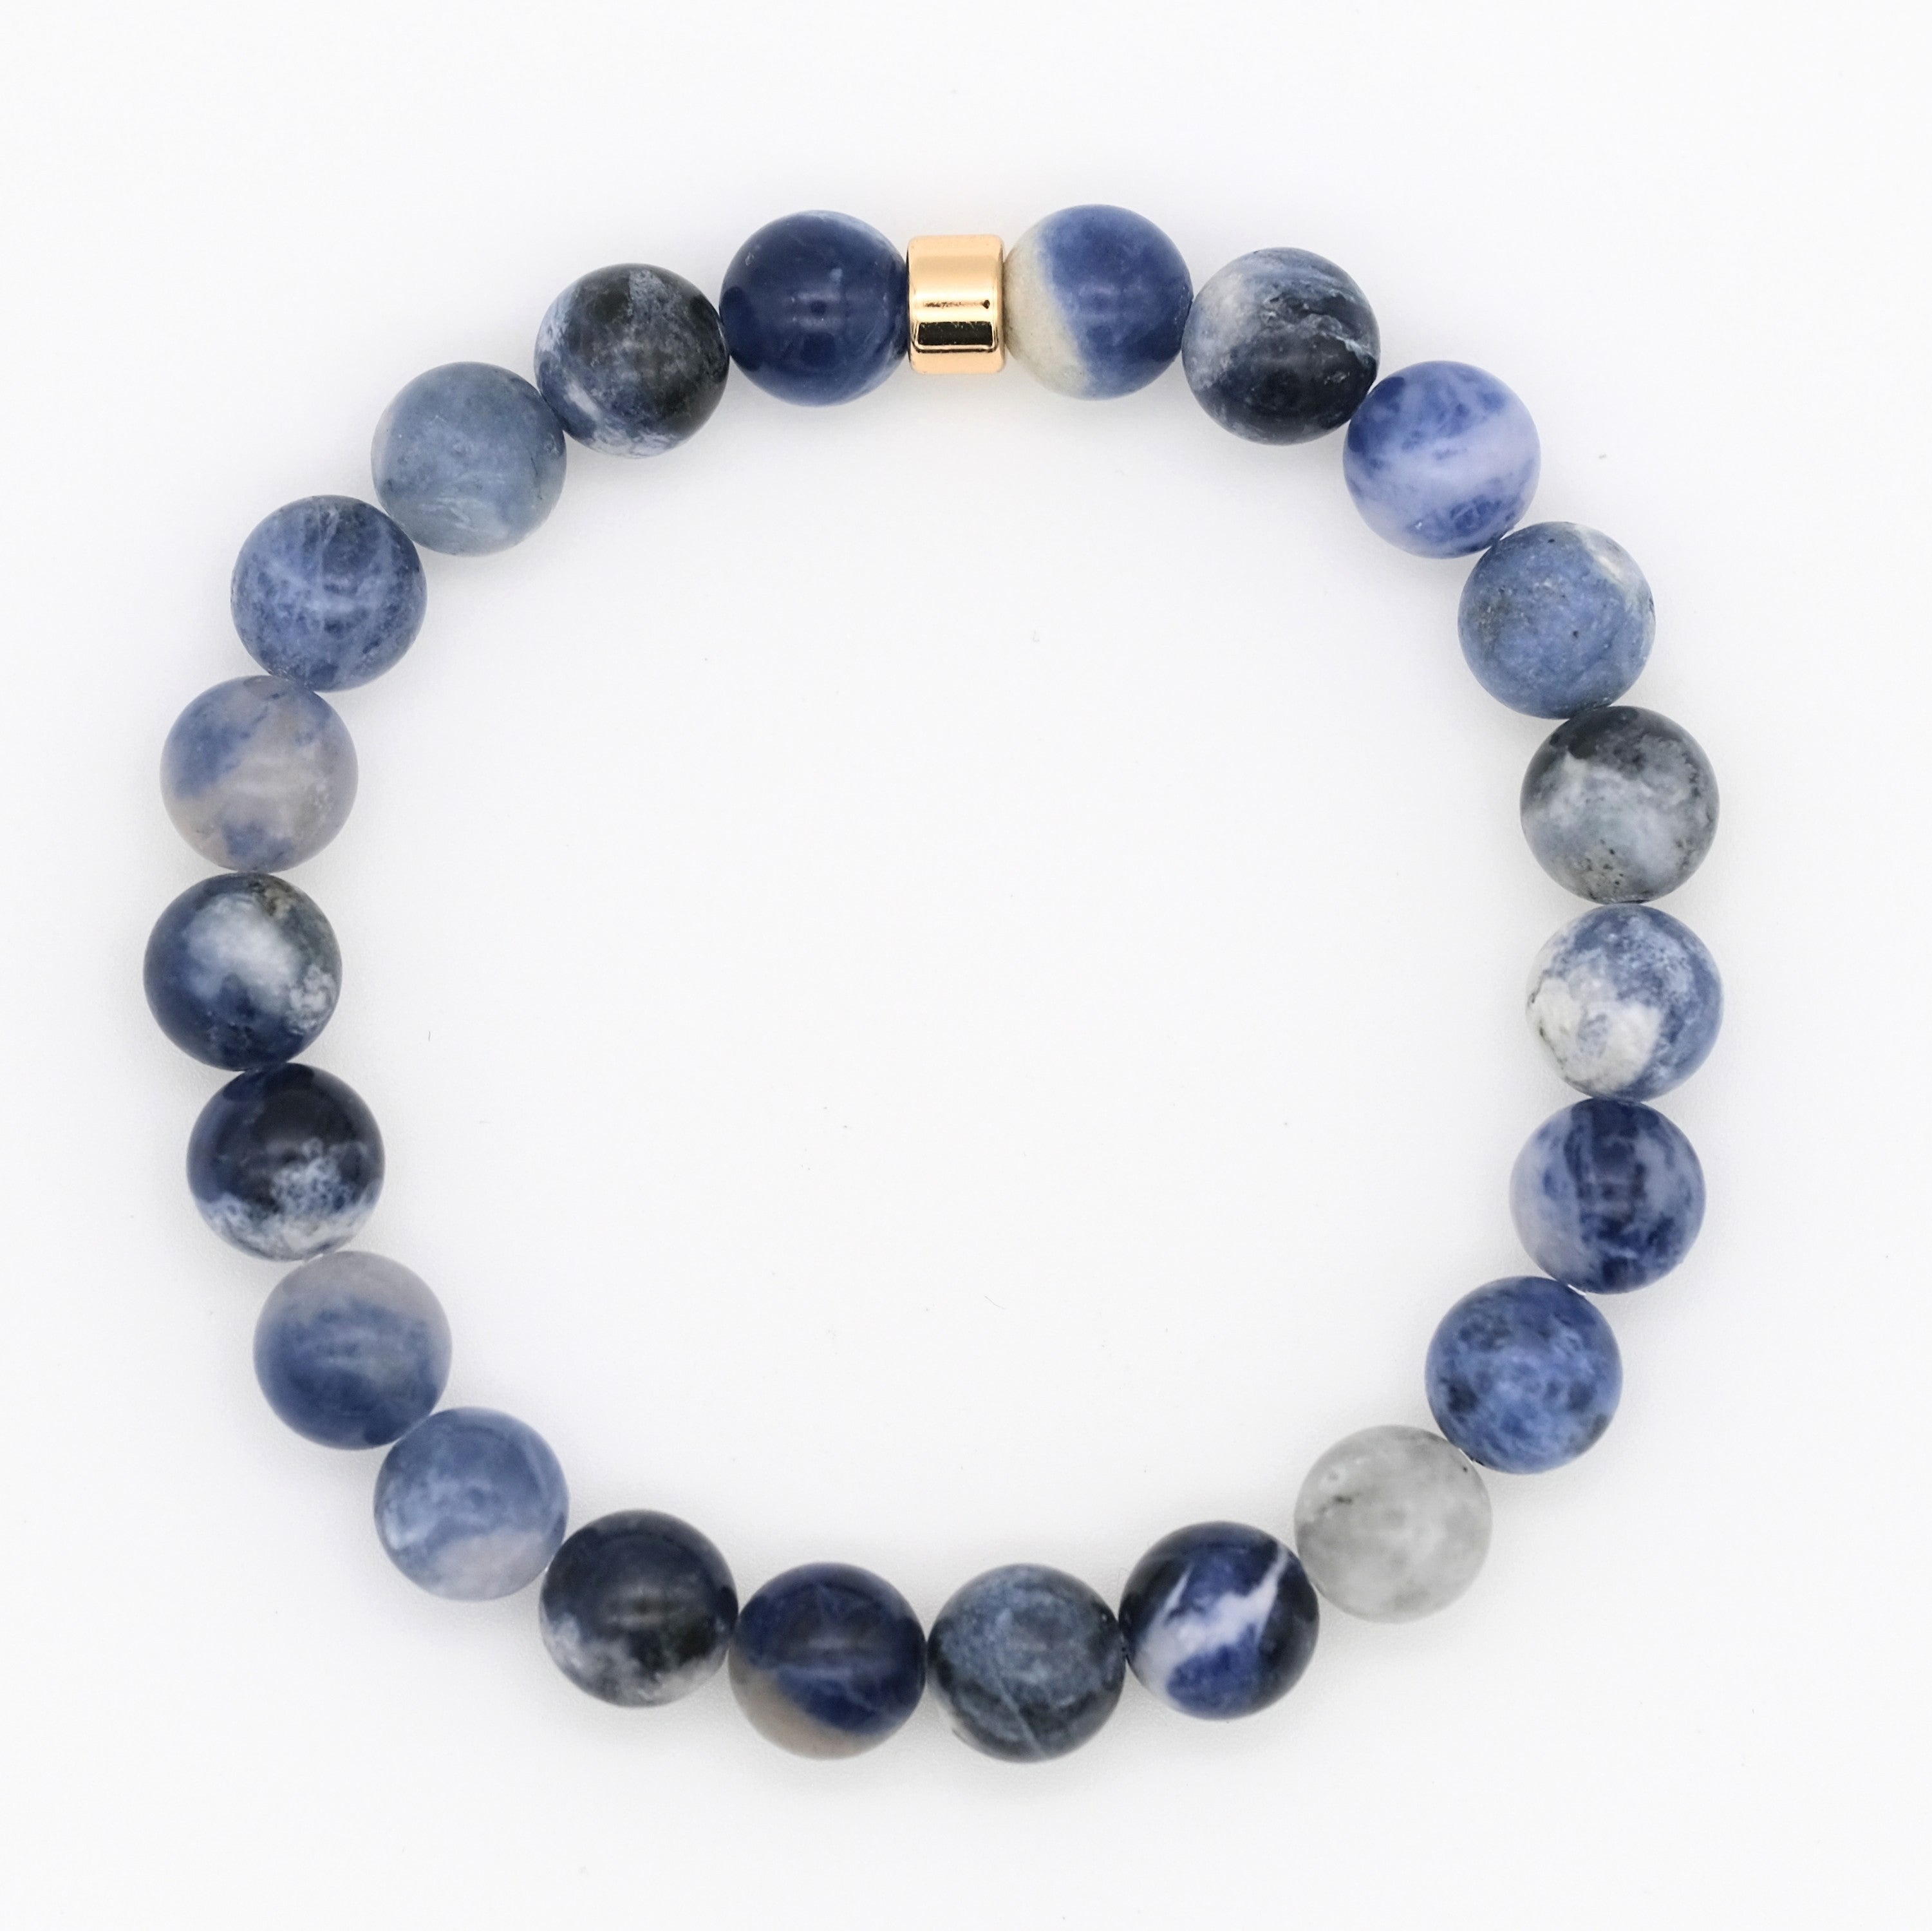 Sodalite gemstone bracelet with gold accessory from above